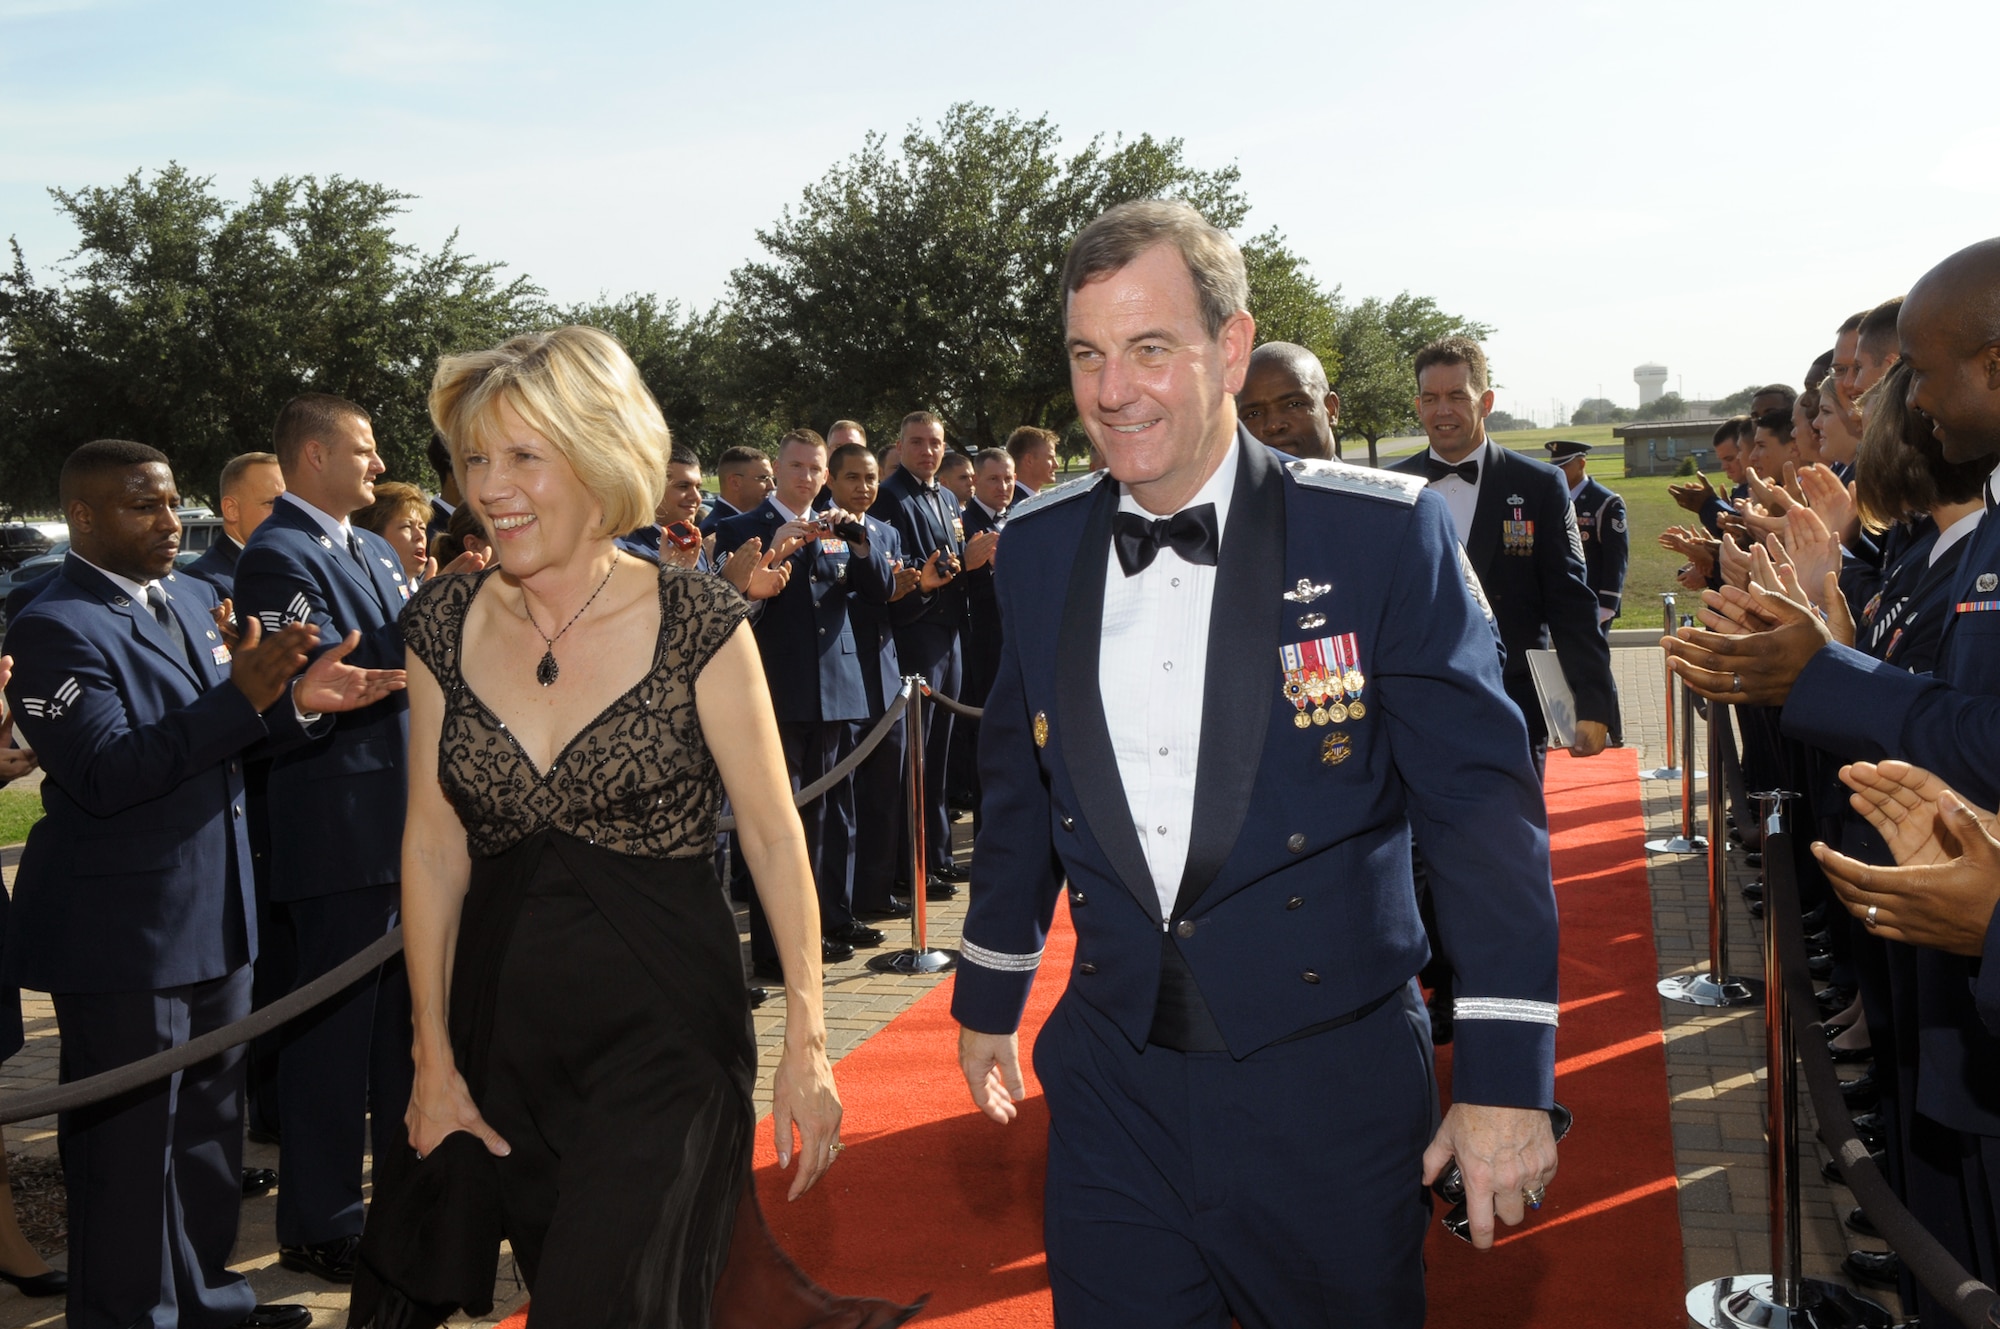 Gen. Stephen R. Lorenz and his wife, Leslie, arrive at the Gateway Club July 16, 2010, on Lackland Air Force Base, Texas, for his induction into the Order of the Sword. The Order of the Sword is the highest honor and tribute noncommissioned officers can bestow upon a person. General Lorenz is the Air Education and Training Command commander and is the sixth leader AETC Airmen have chosen to recognize by presenting the sword. (U.S. Air Force photo/Joel Martinez)